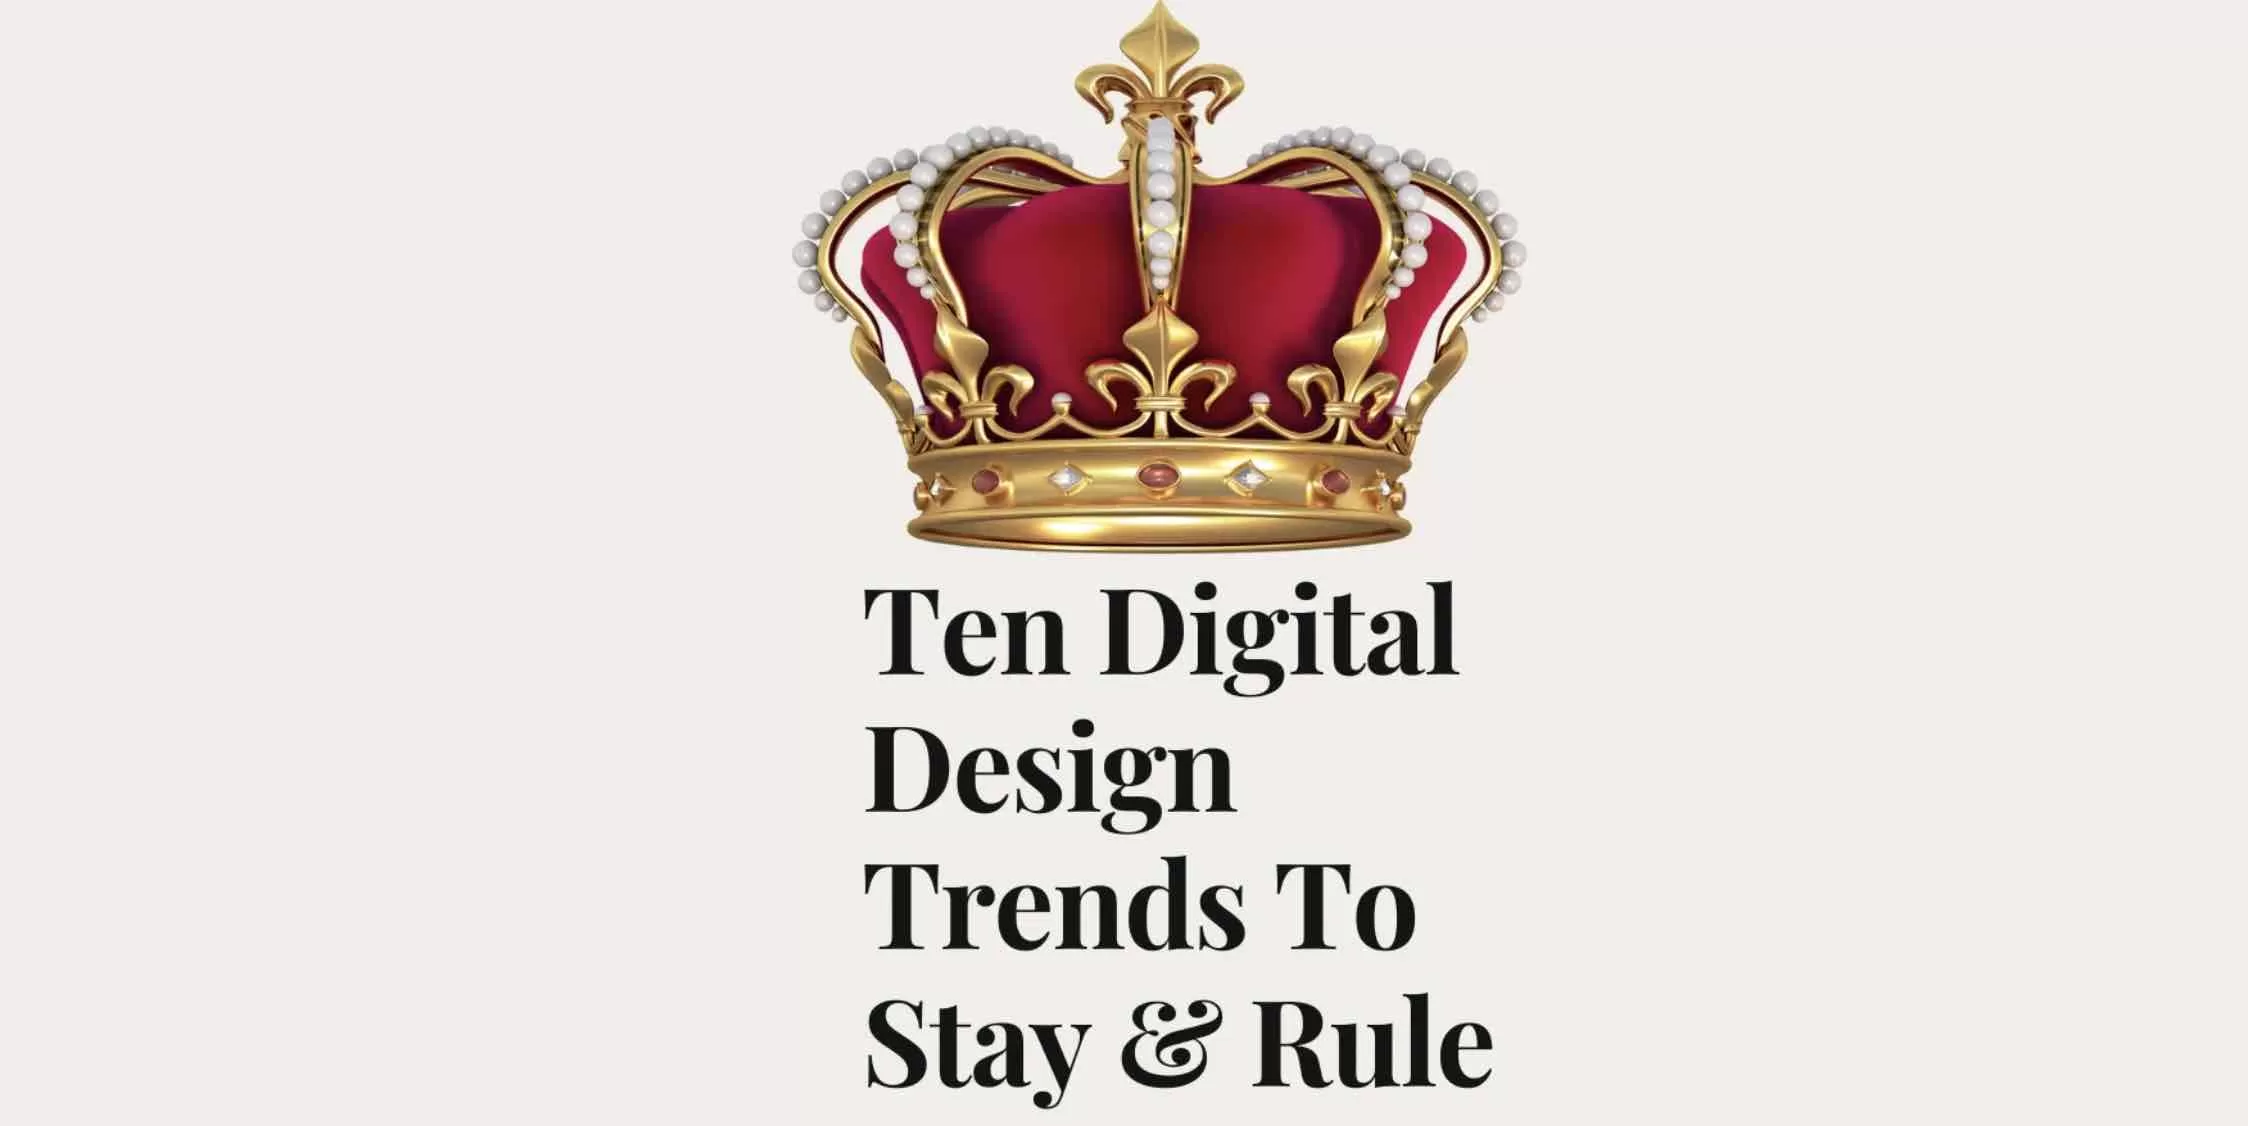 10 Digital Design Trends To Stay & Rule Users’ Behaviour